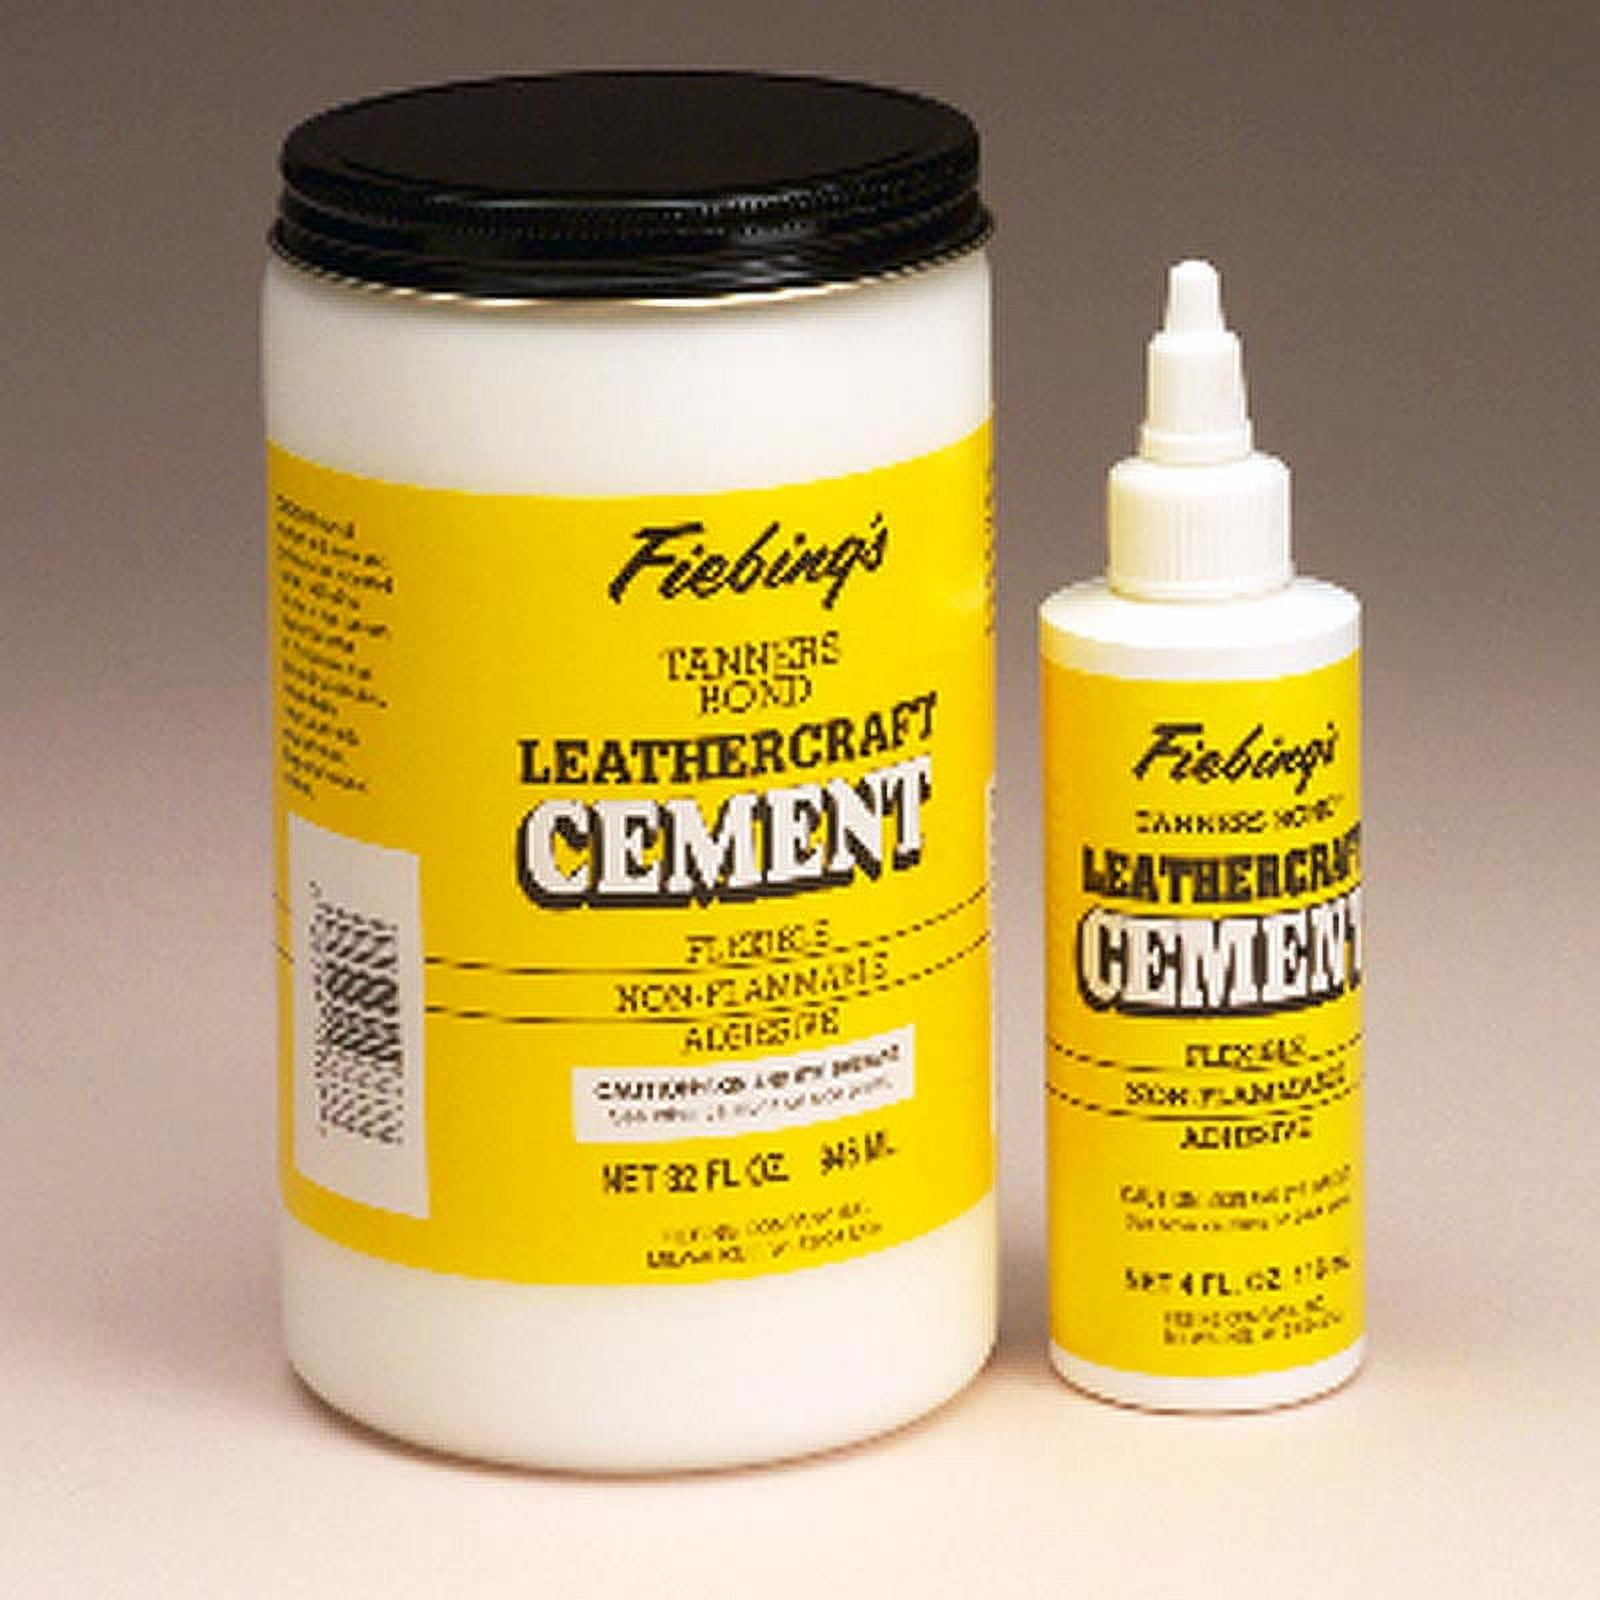 Fiebing's Leather Craft Cement Tanners Bond Leather Glue - 4 oz - Quar —  Leather Unlimited